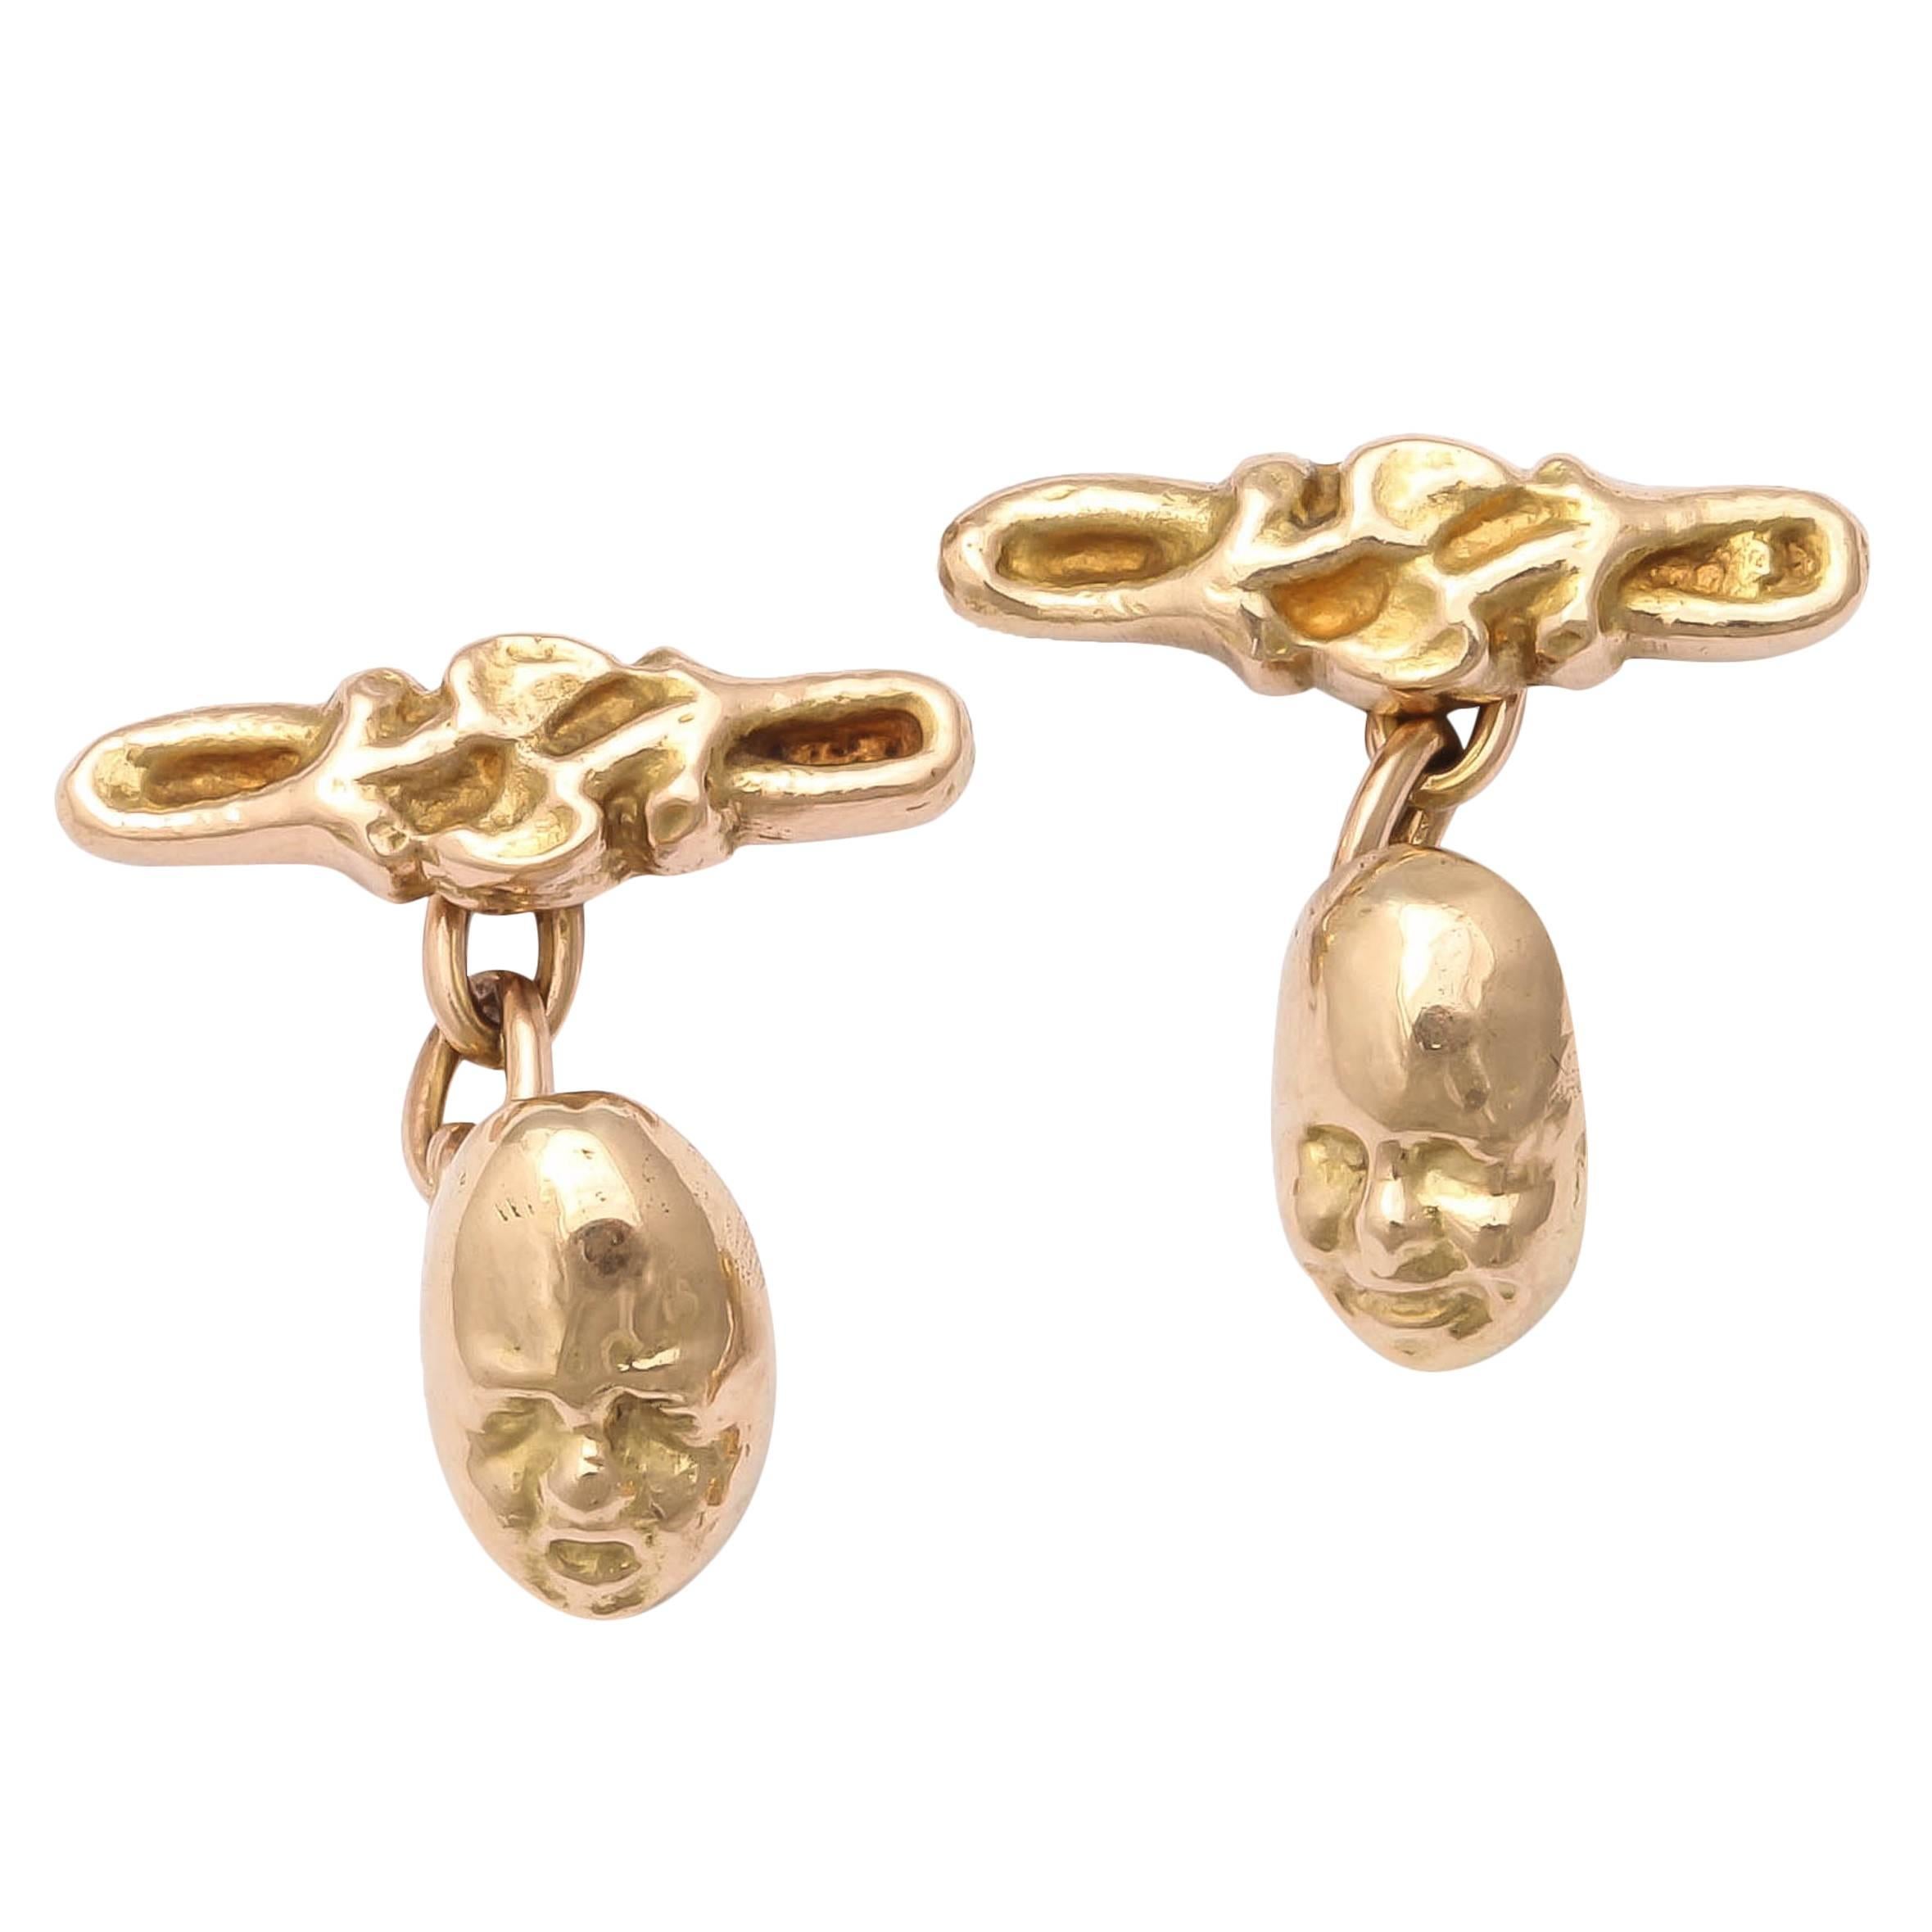 Small 19th Century 18k Gold Tragedy and Comedy Cufflinks